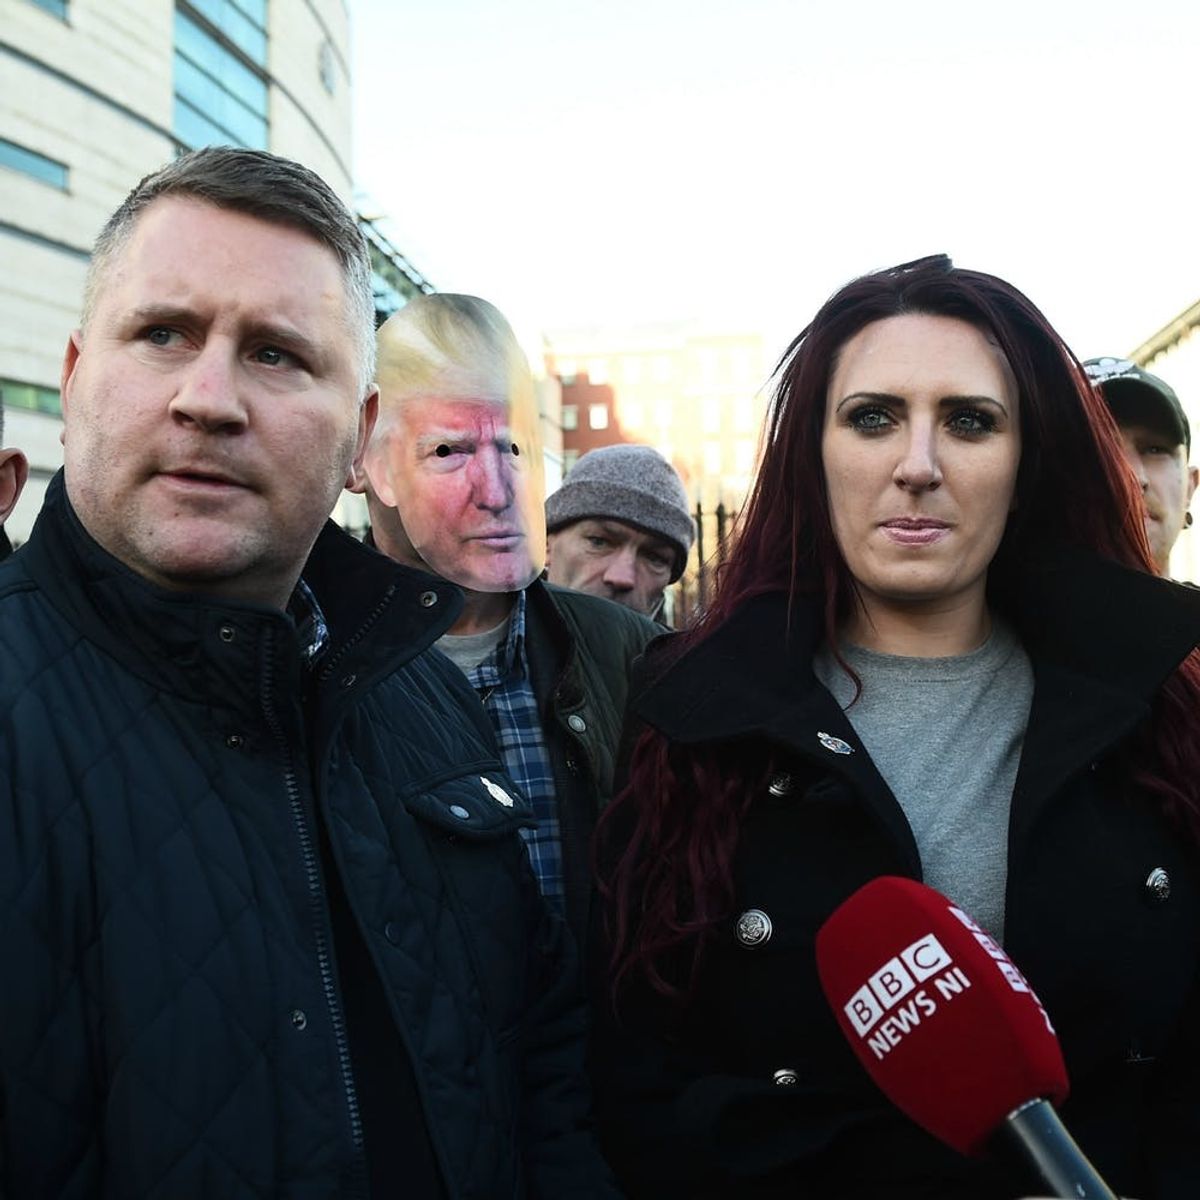 Facebook Permanently Banned UK-Based Hate Group ‘Britain First’